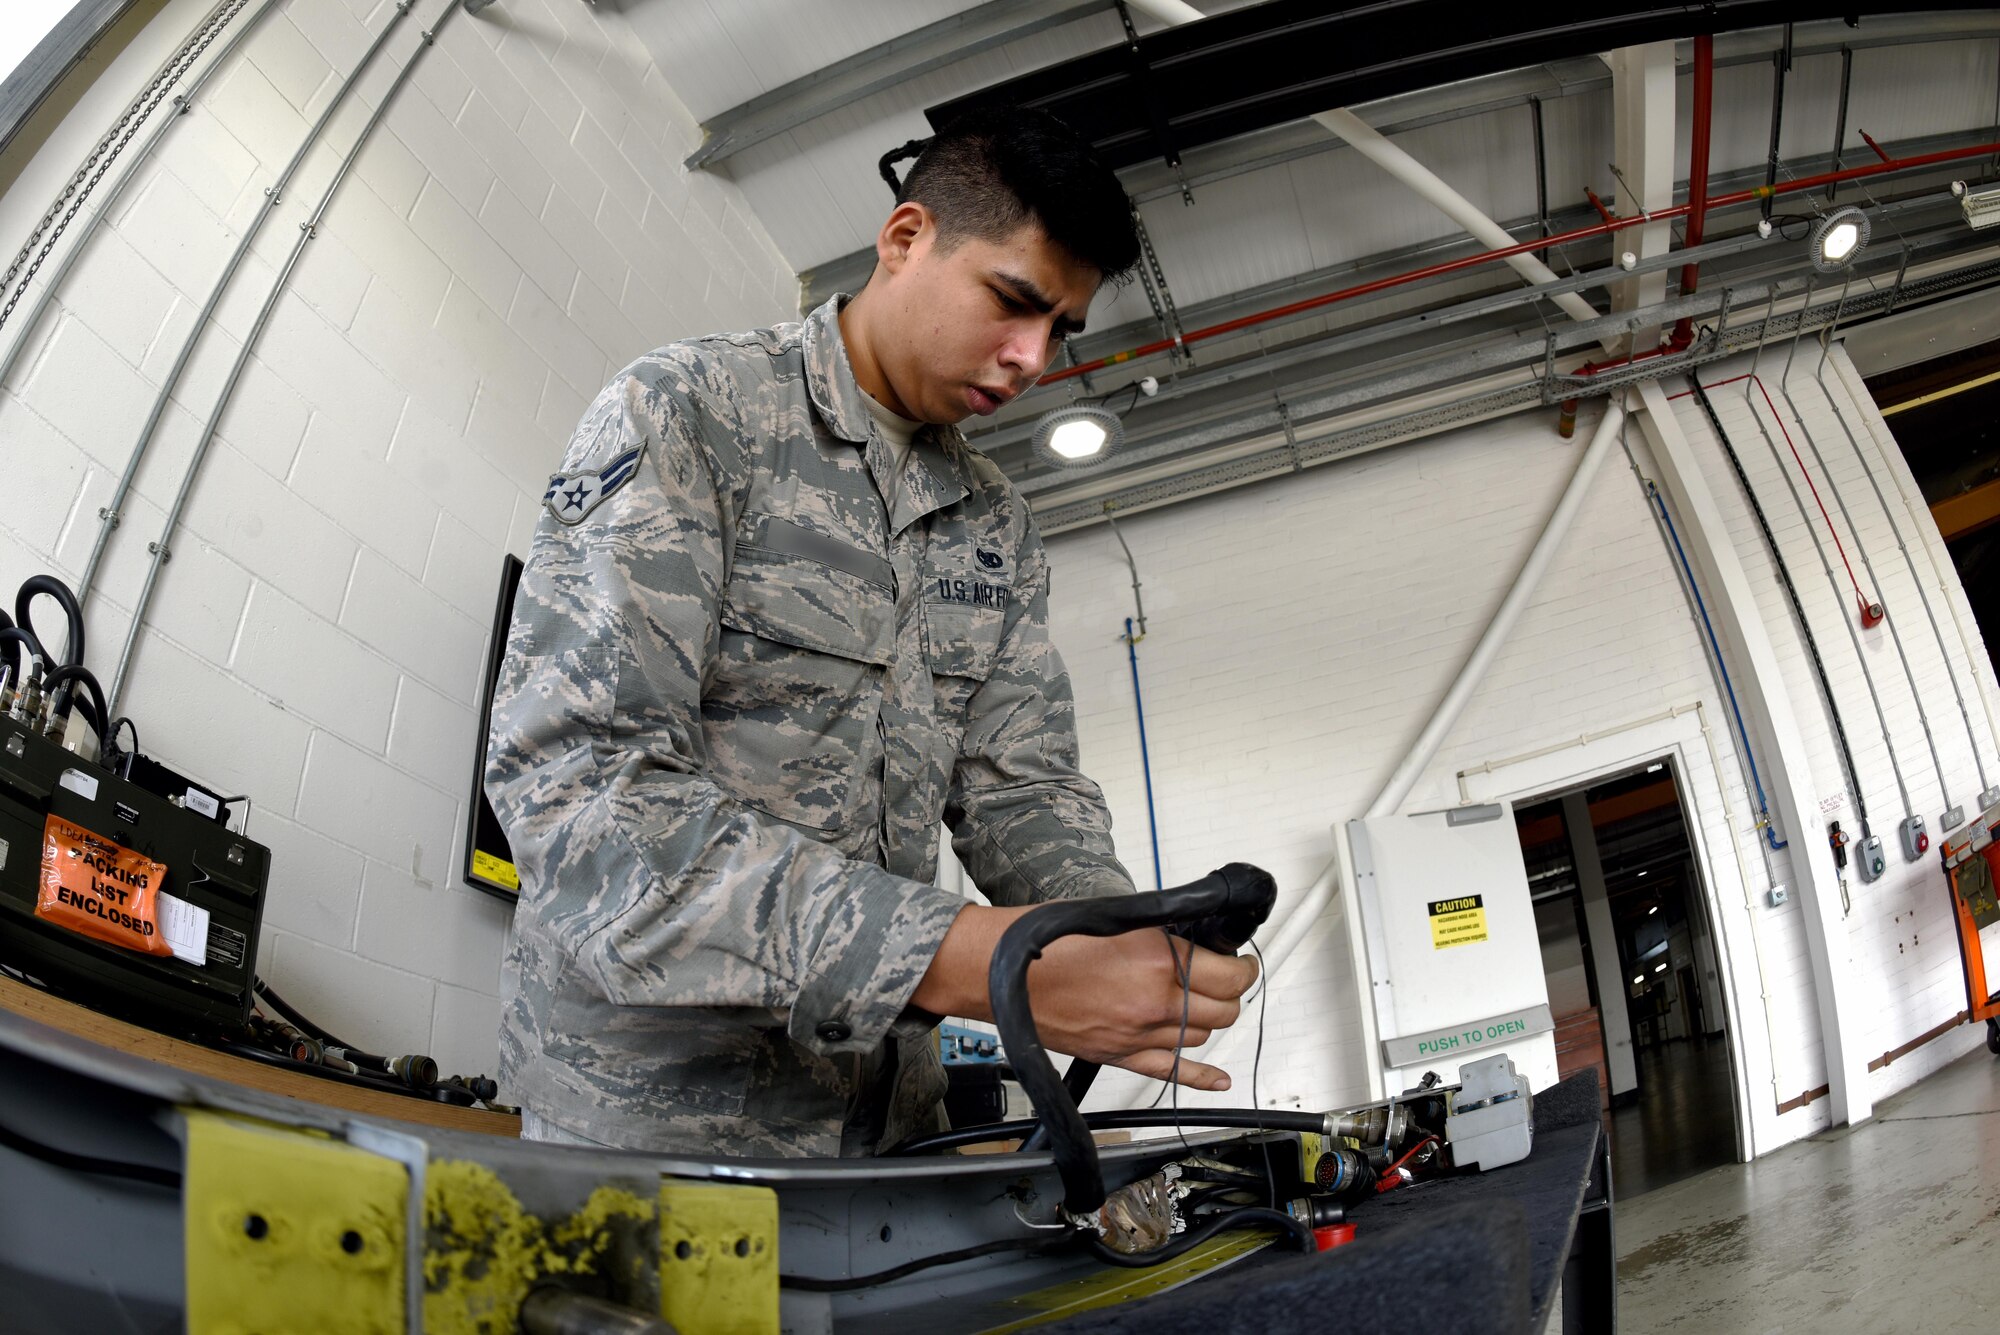 An aircraft armament specialist from the 48th Munitions Squadron tests for a wiring fault at Royal Air Force Lakenheath, England, June 13. Aircraft armament specialist test suspension, launch and release systems for retentive locking and manual or electrical release. (U.S. Air Force photo/Airman 1st Class John A. Crawford)